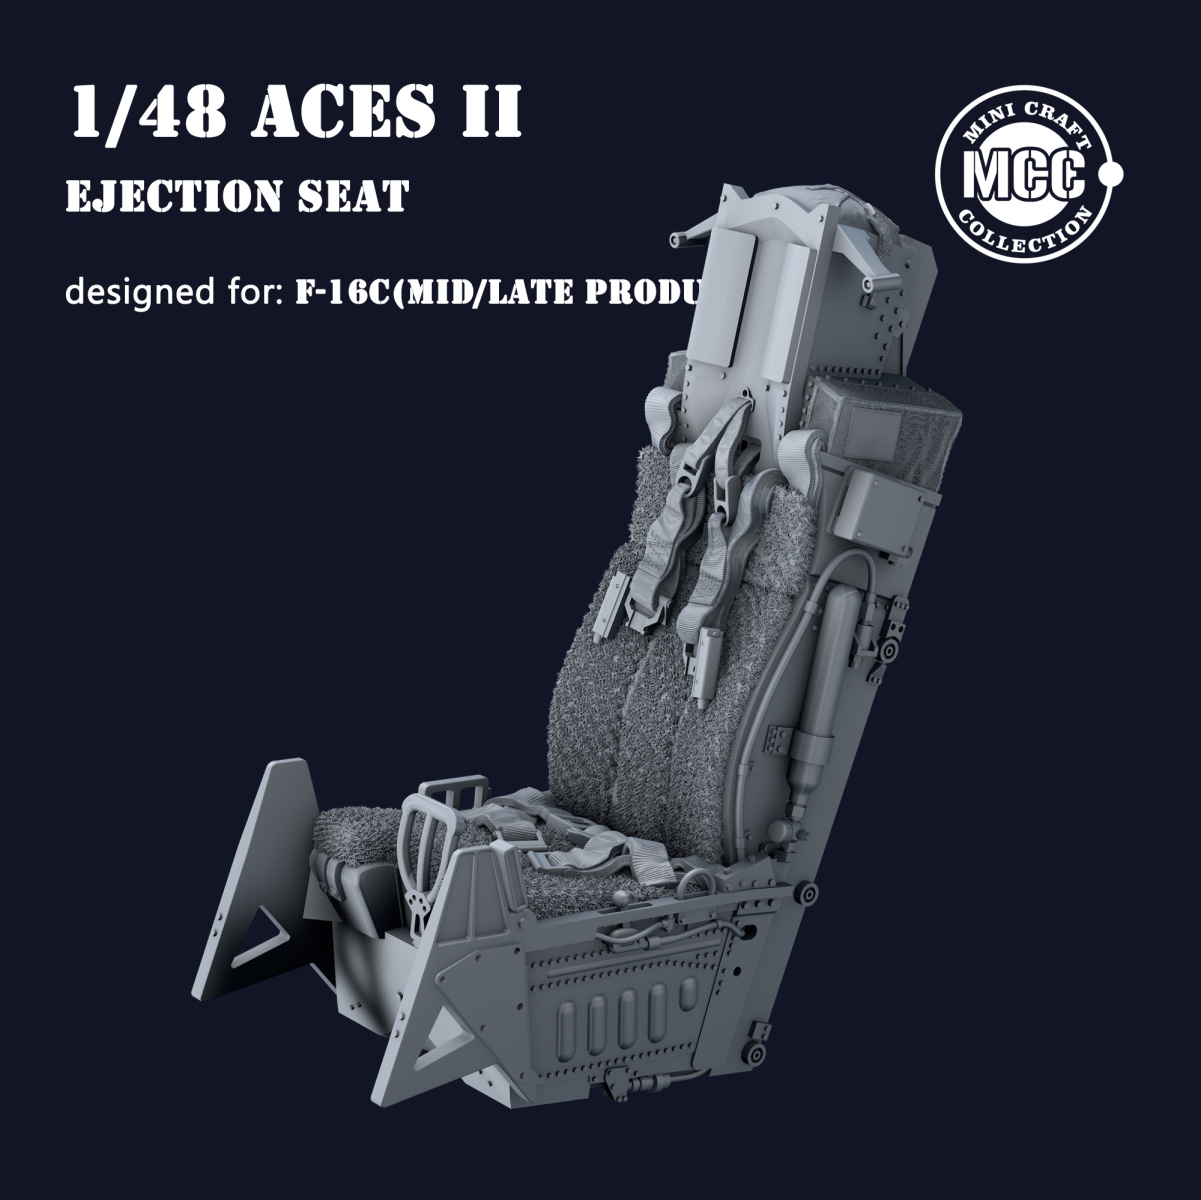 1/48 ACES II Ejection Seat wool pad for F-16C Mid/Late (1pcs)